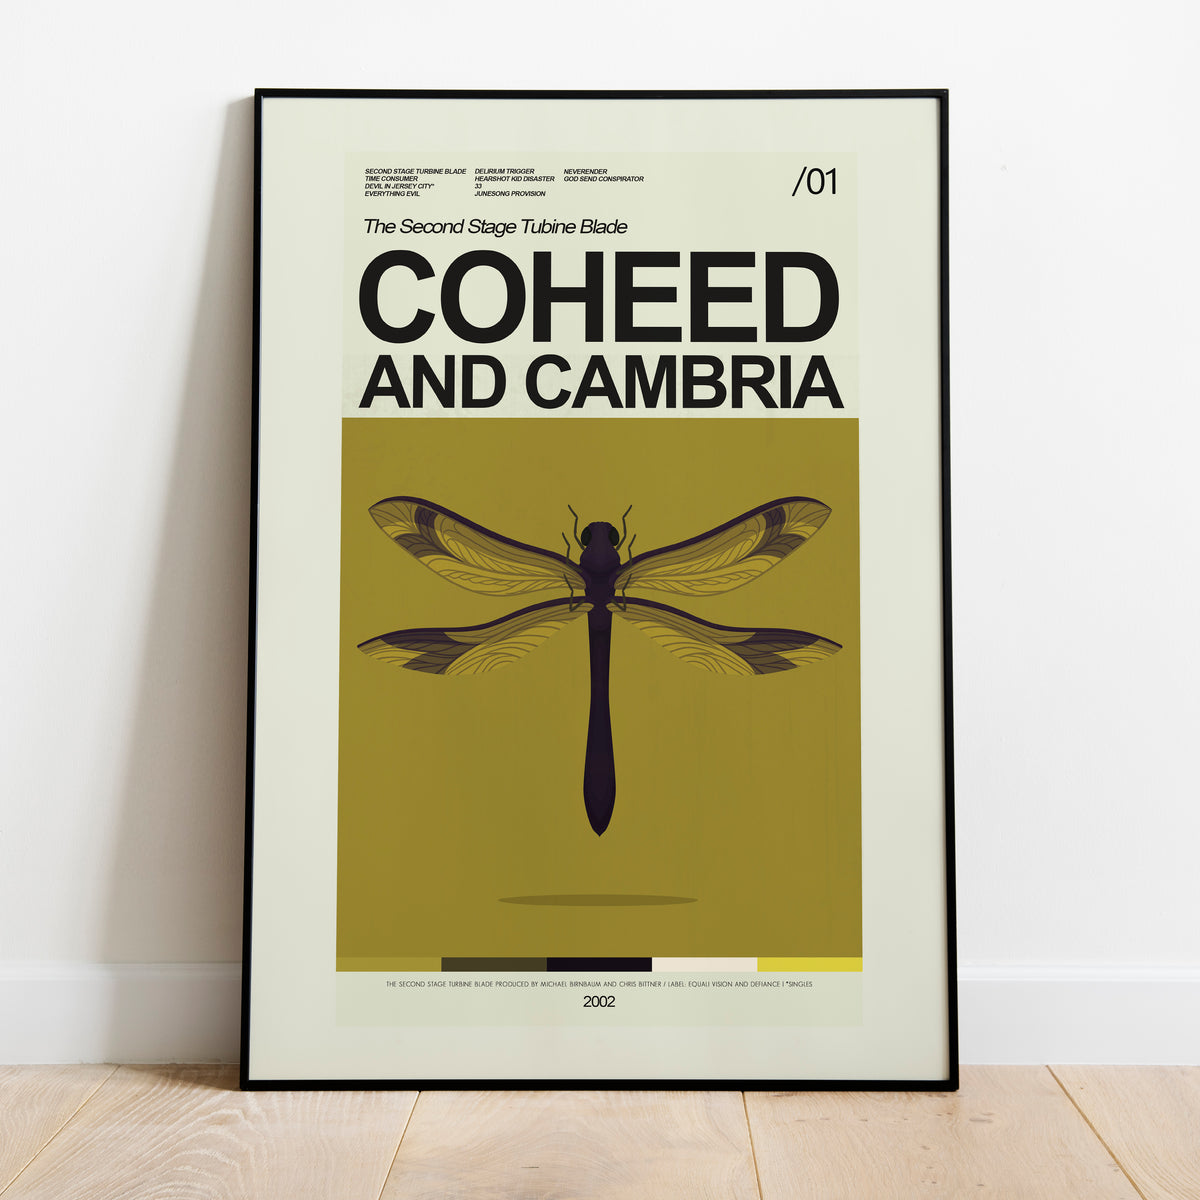 Coheed and Cambria - The Second Stage Turbine Blade (Album) Inspired | 12"x18" or 18"x24" Print only